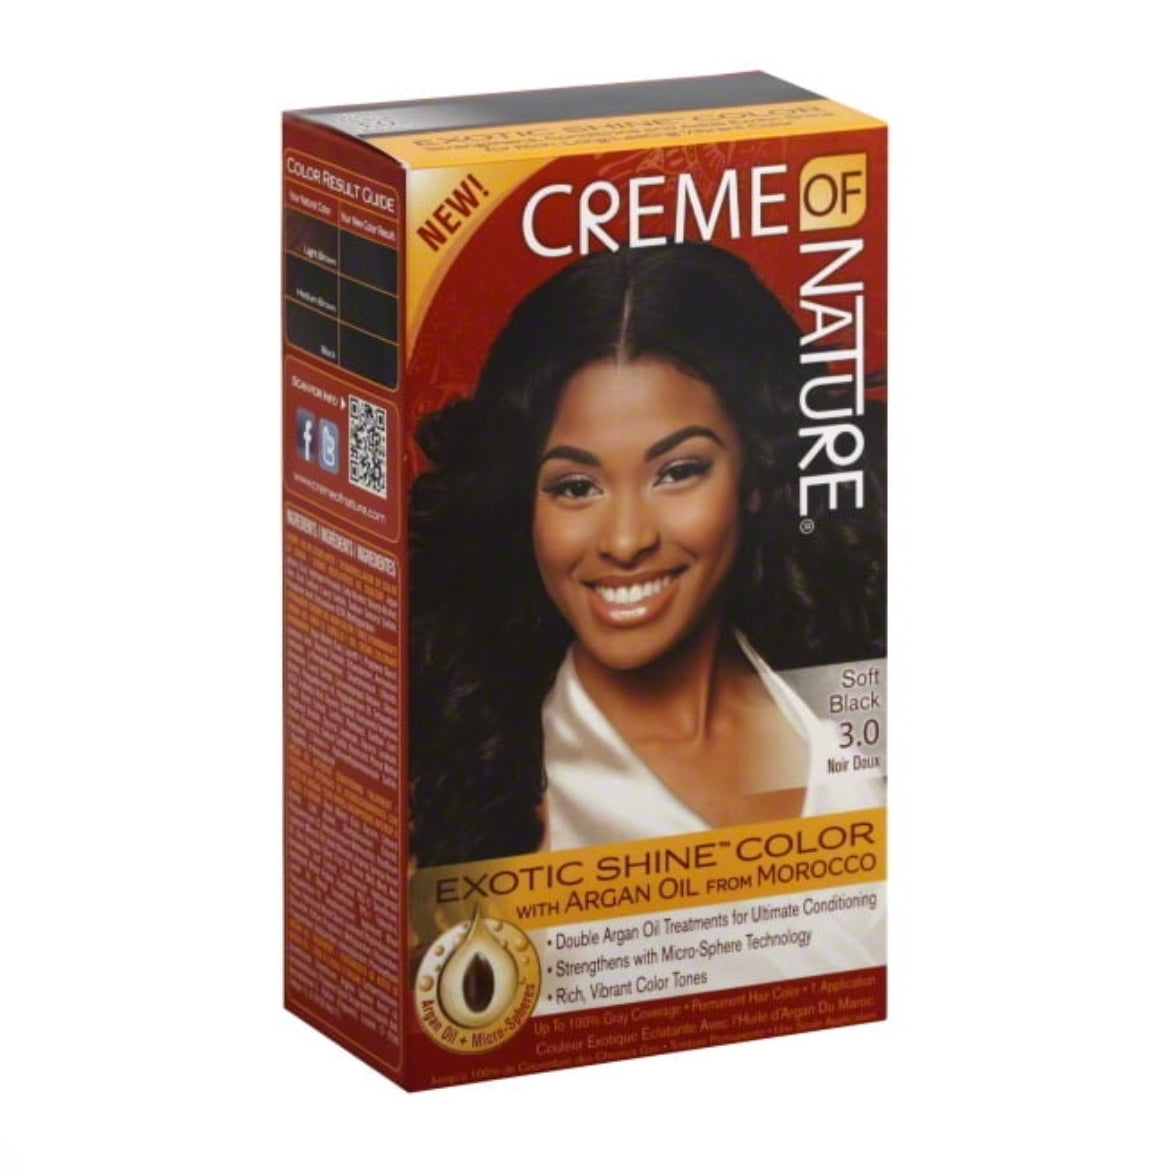 Colomer Creme Of Nature Exotic Shine Color Permanent Hair Color, 1 ea